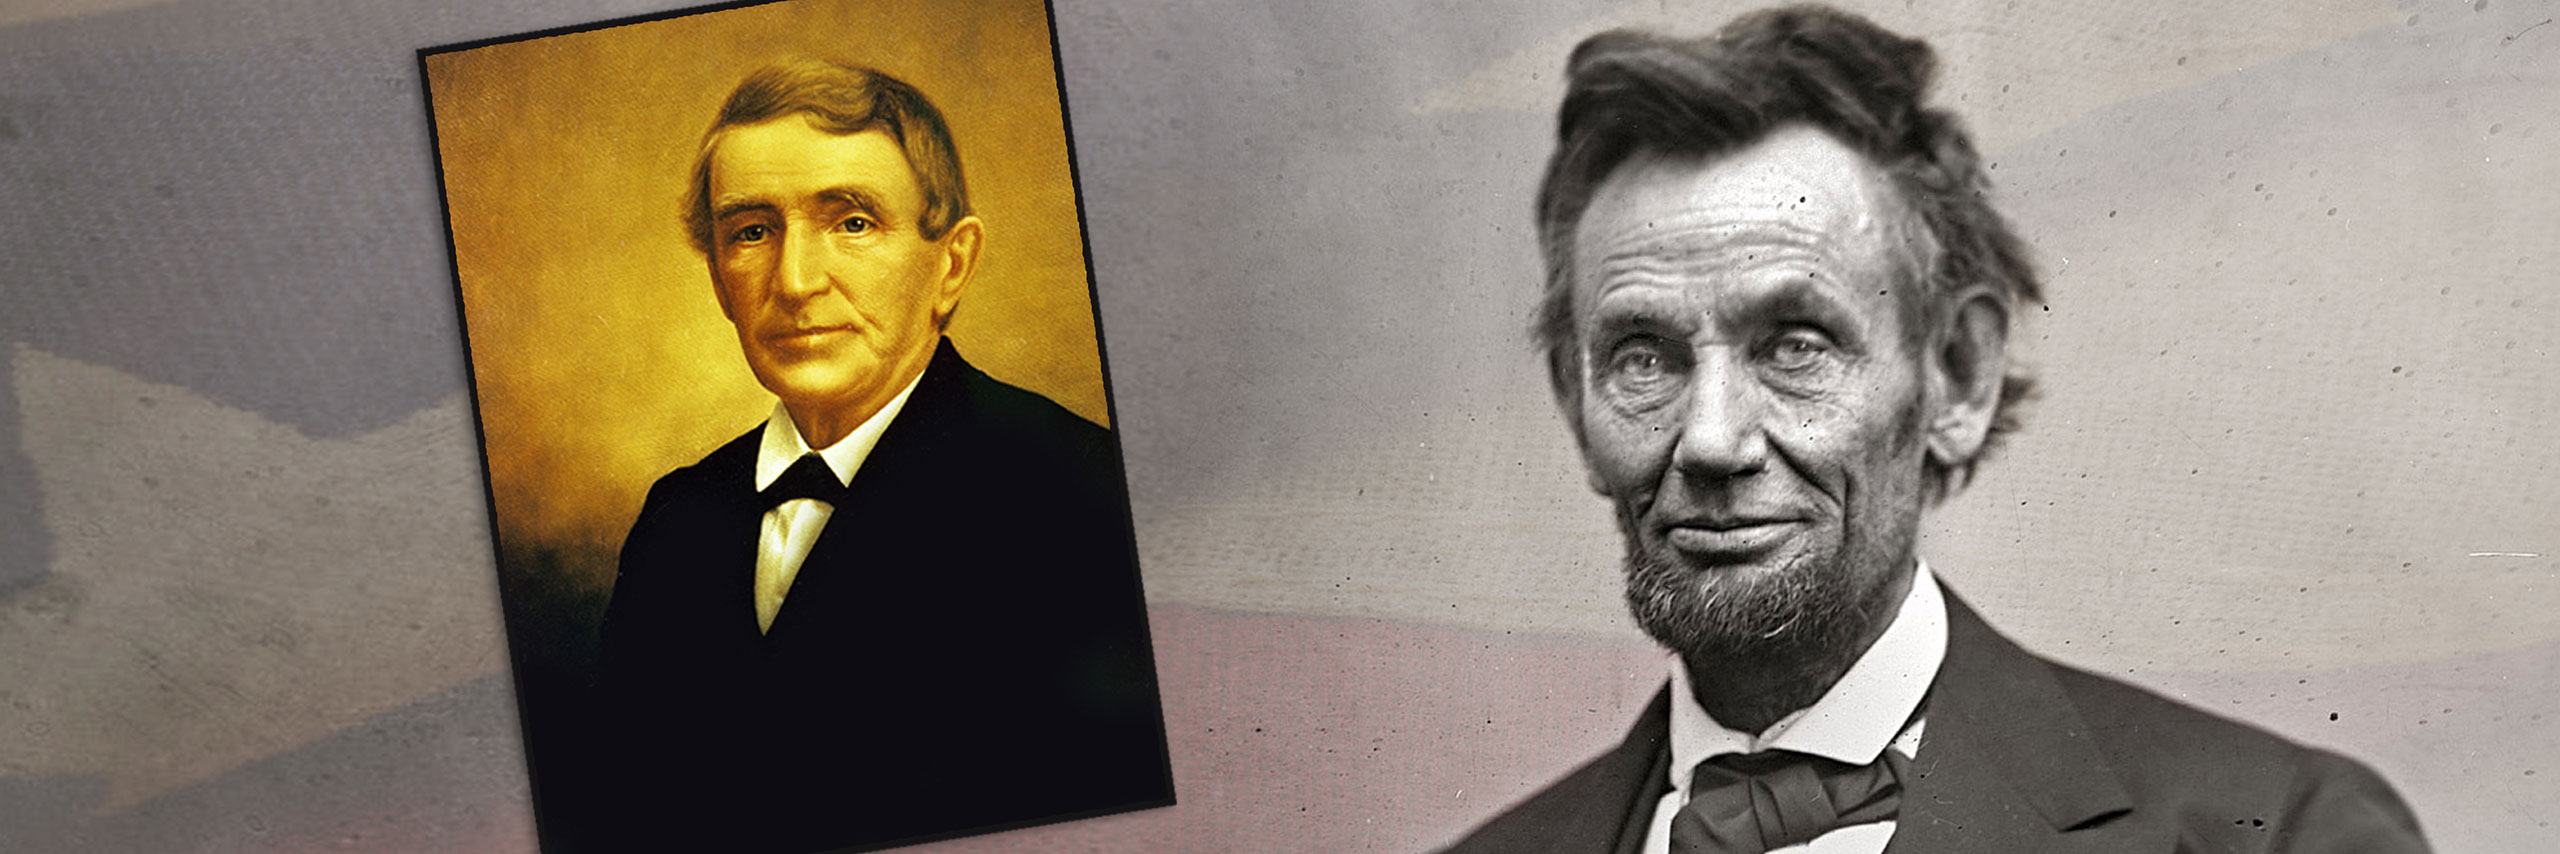 Jesse Fell and Abraham Lincoln